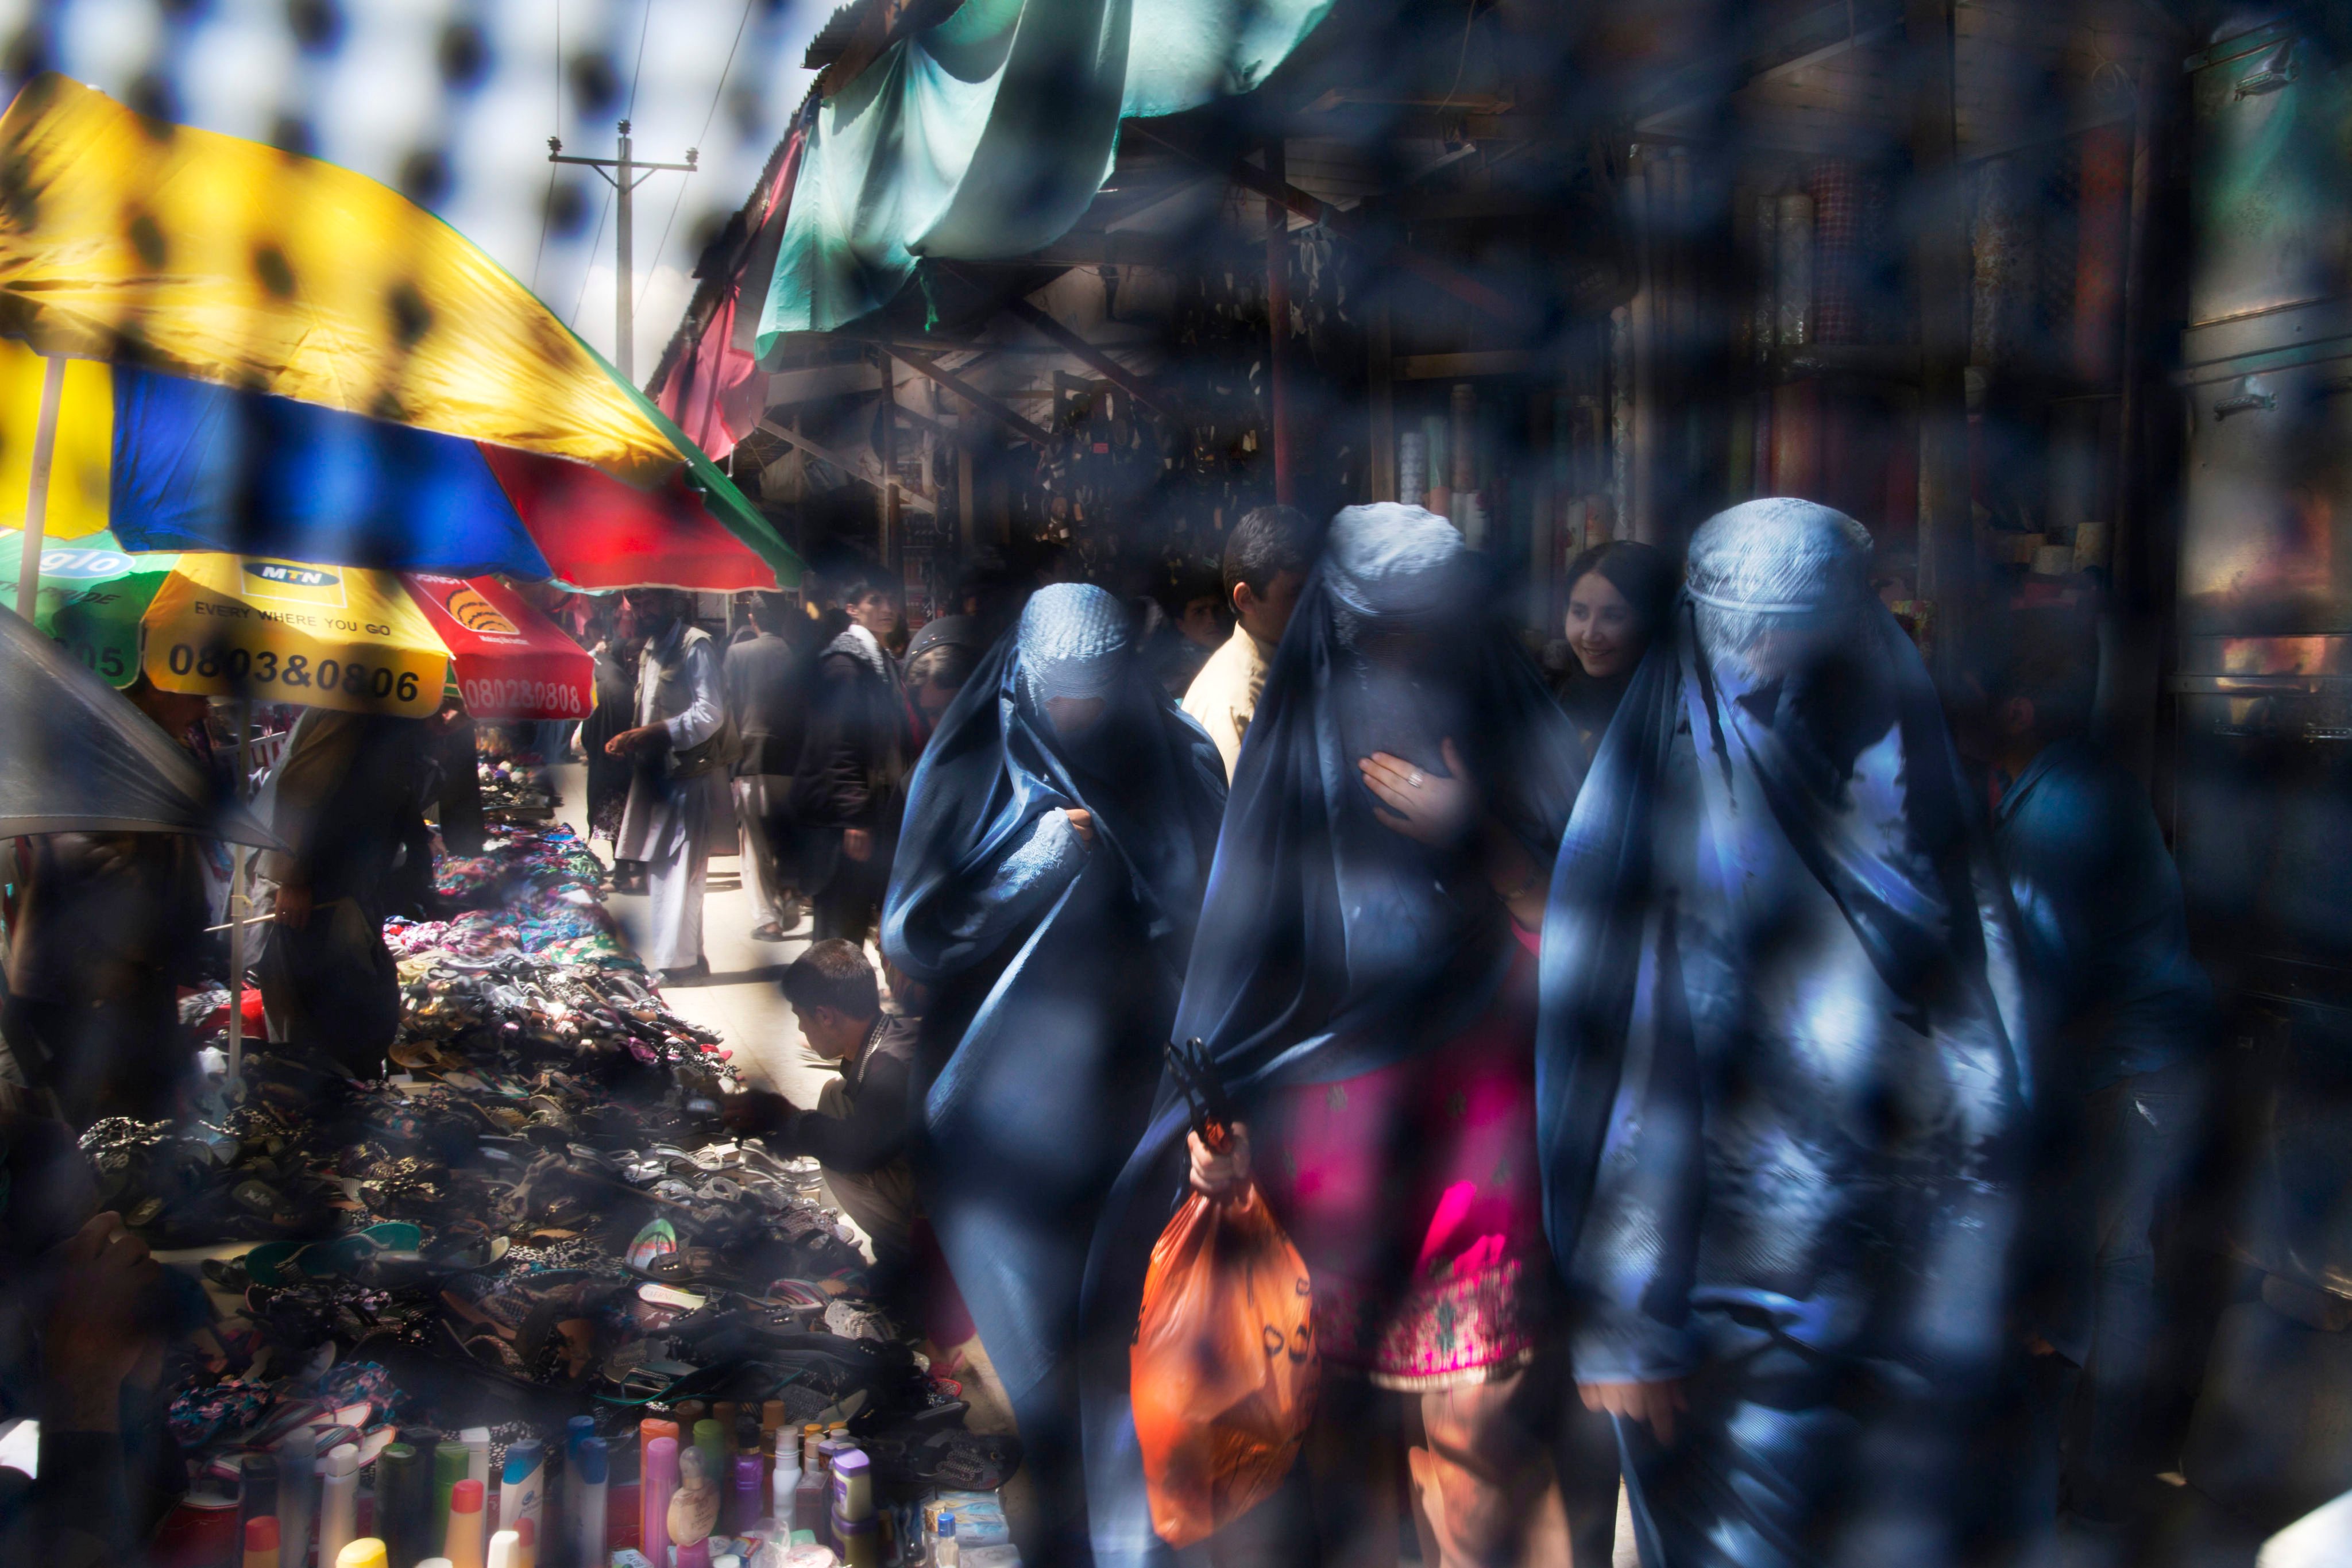 Seen through the eye grid of a burqa, women walk through a market in Kabul. The Taliban – who say they respect women’s rights in line with their interpretation of Islamic law and local customs – have closed girls’ high schools and placed travel restrictions on women without a male guardian and restricted access to parks and gyms. Photo: AP